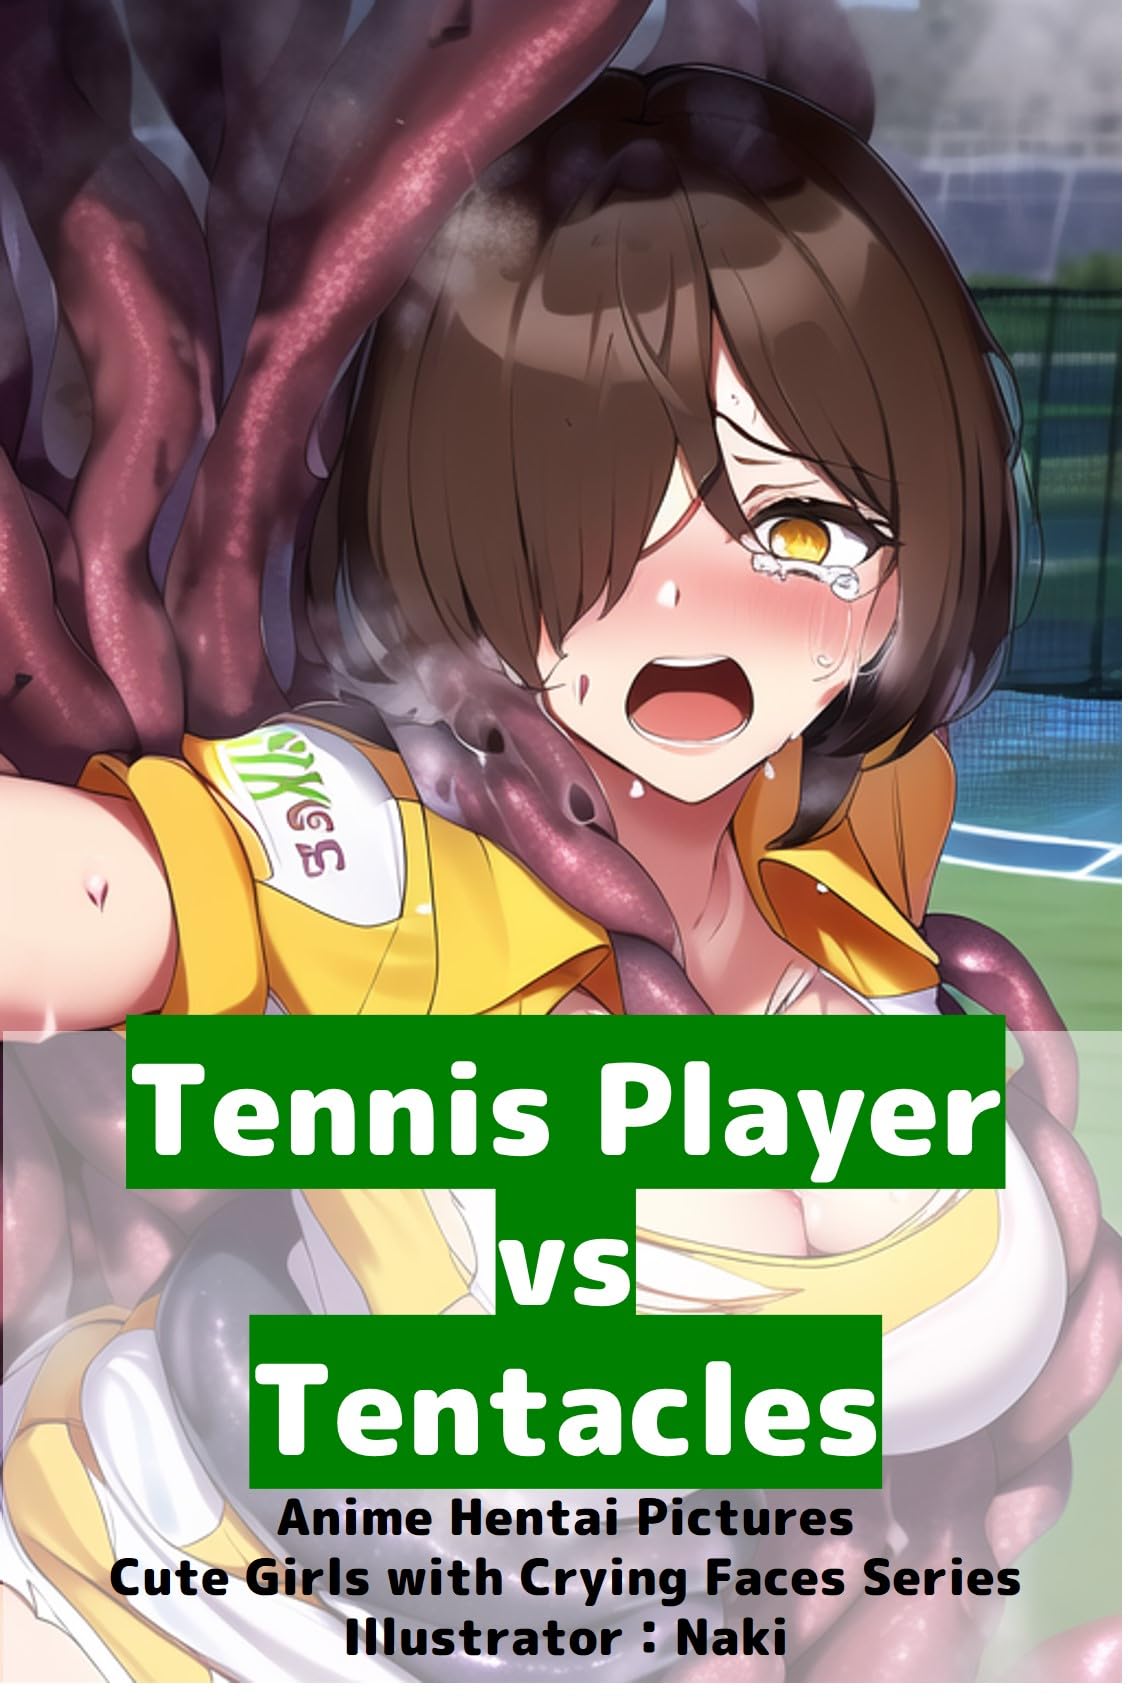 amy d bell recommends Anime Hentai Tentacles